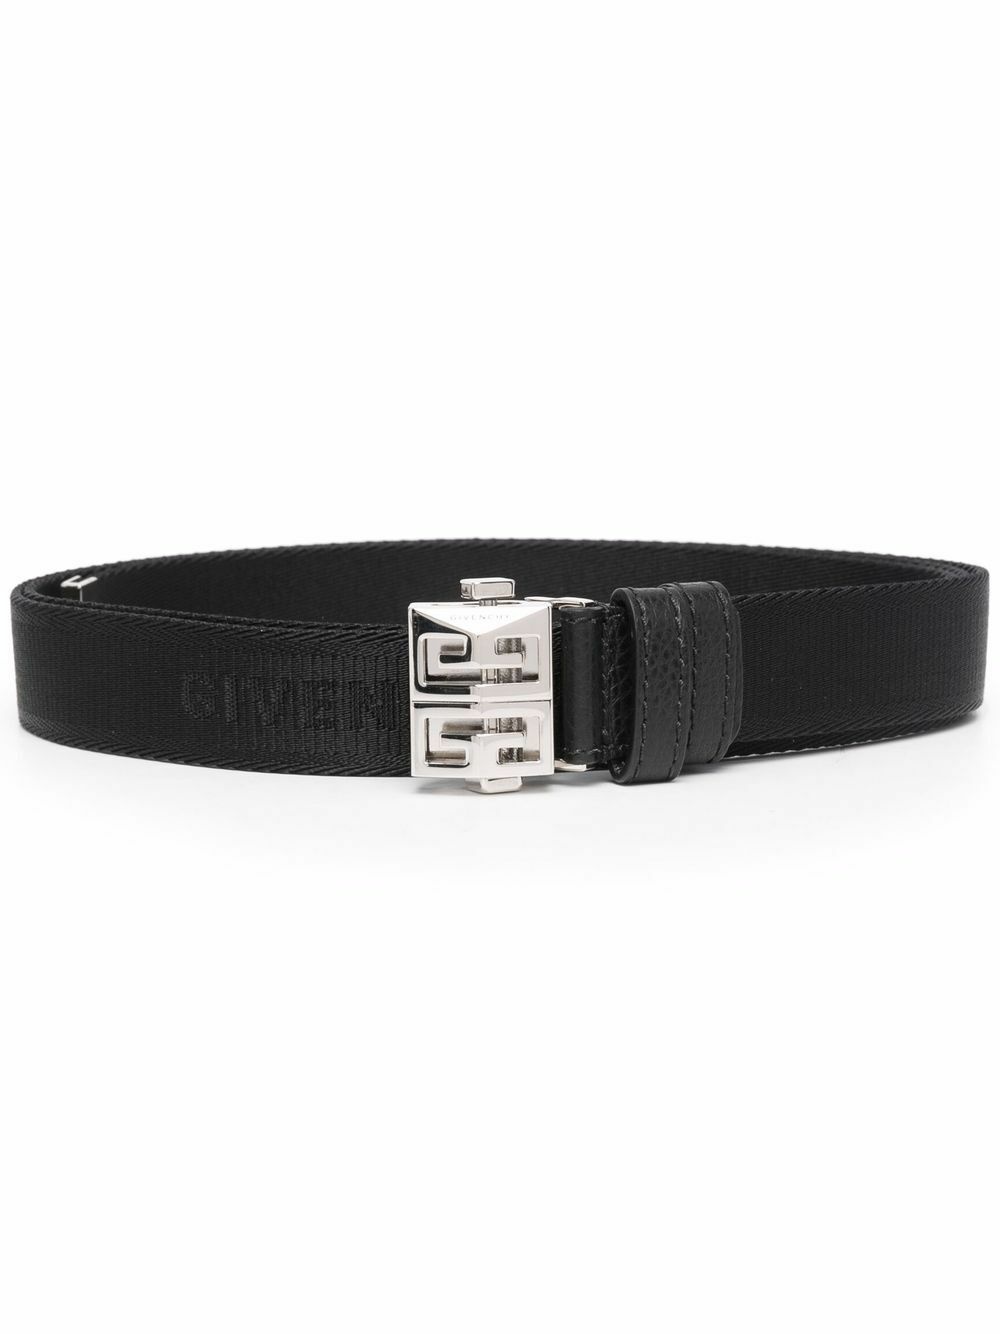 GIVENCHY - Military Belt Givenchy